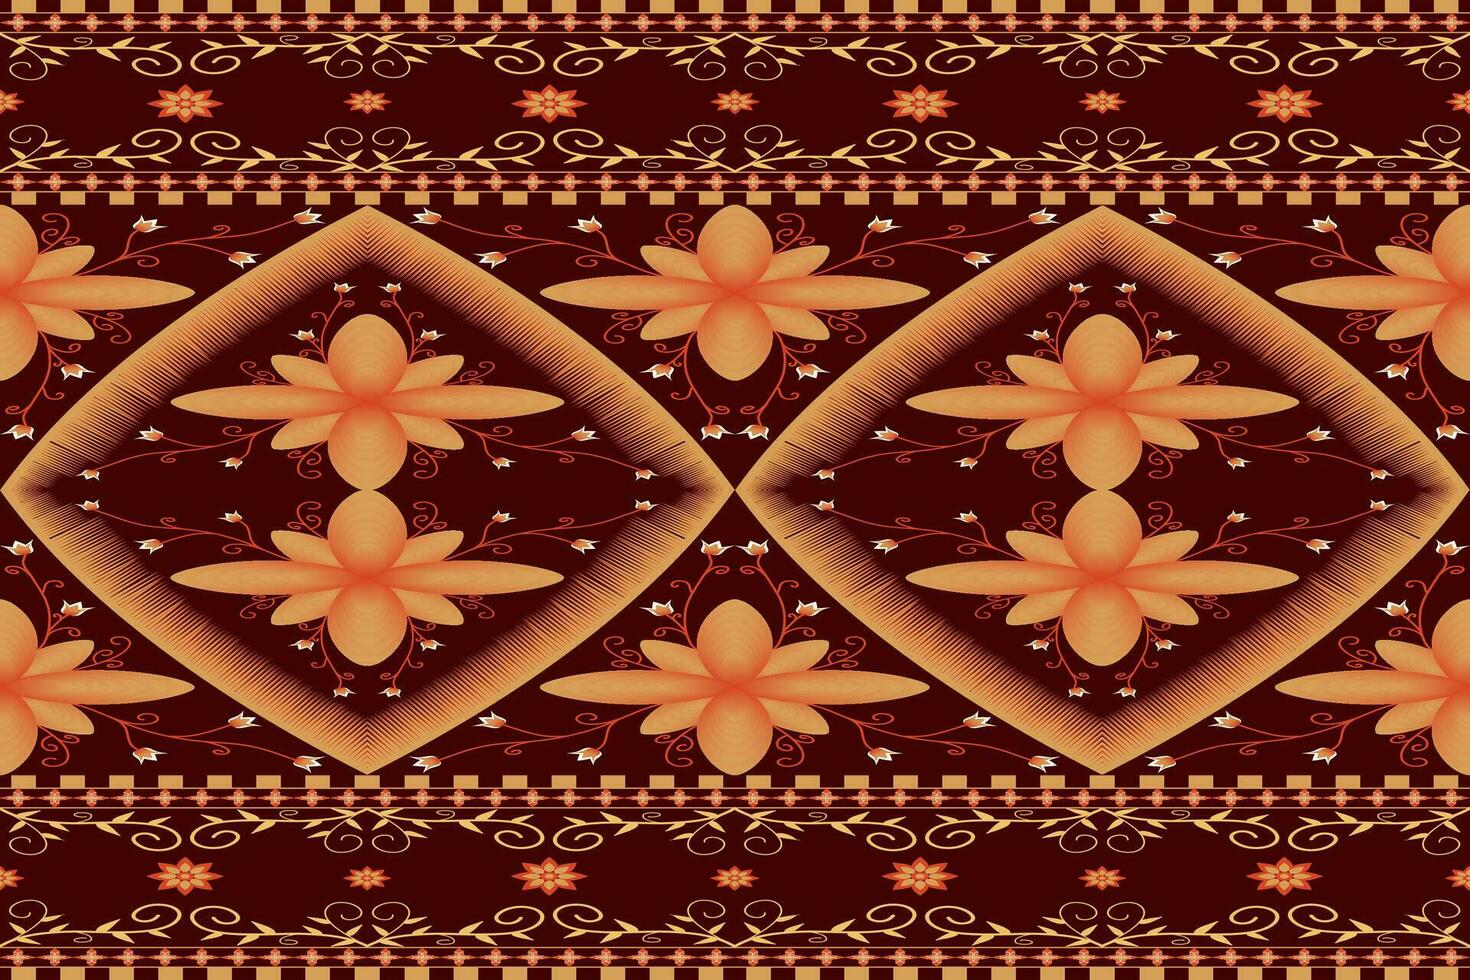 Ethnic abstract ikat seamless pattern in tribal.Fabric Indian and maxican style. Design for background, wallpaper, illustration, fabric, clothing, carpet, textile, batik, embroidery. vector